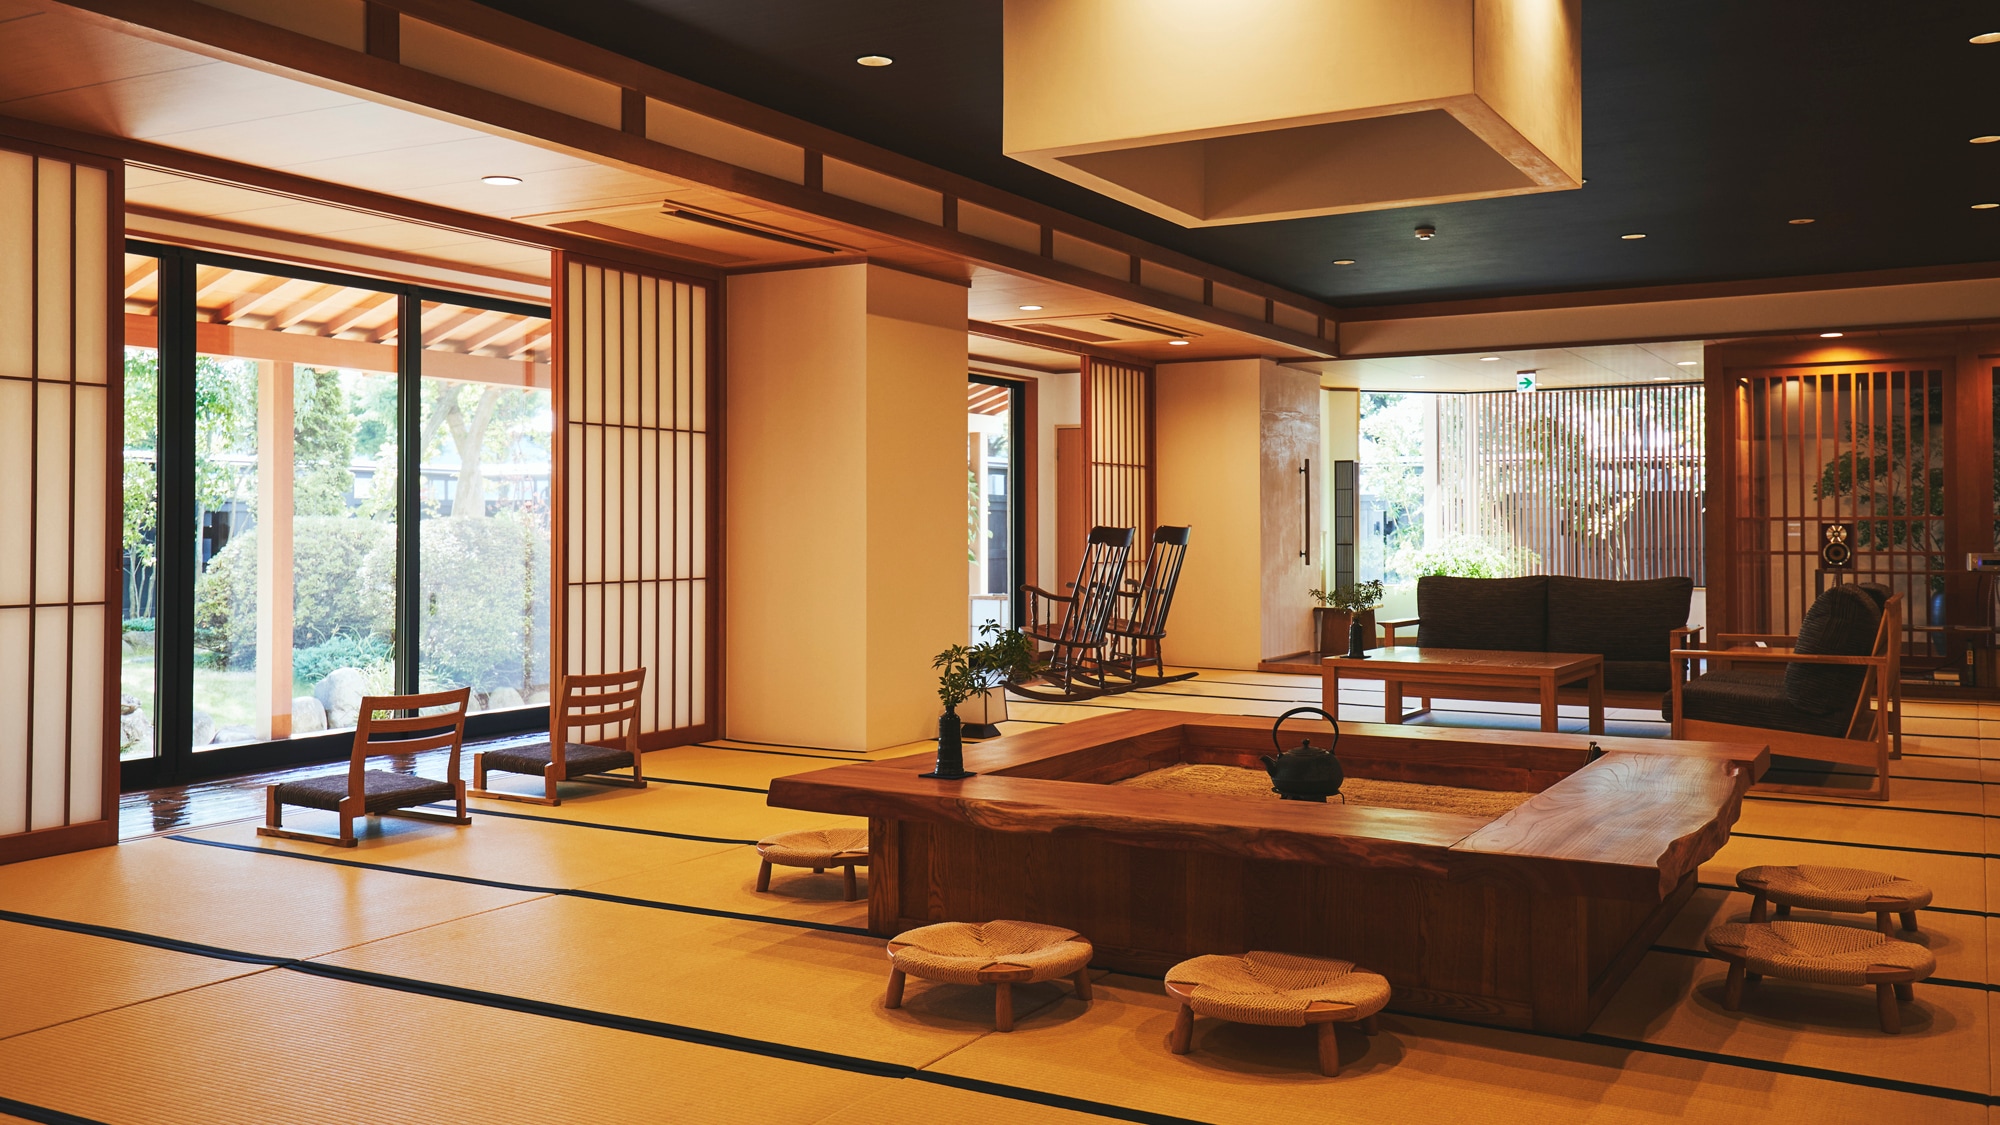 [Irori Tea Room] You can spend time chatting while looking at the hearth and the garden scenery.